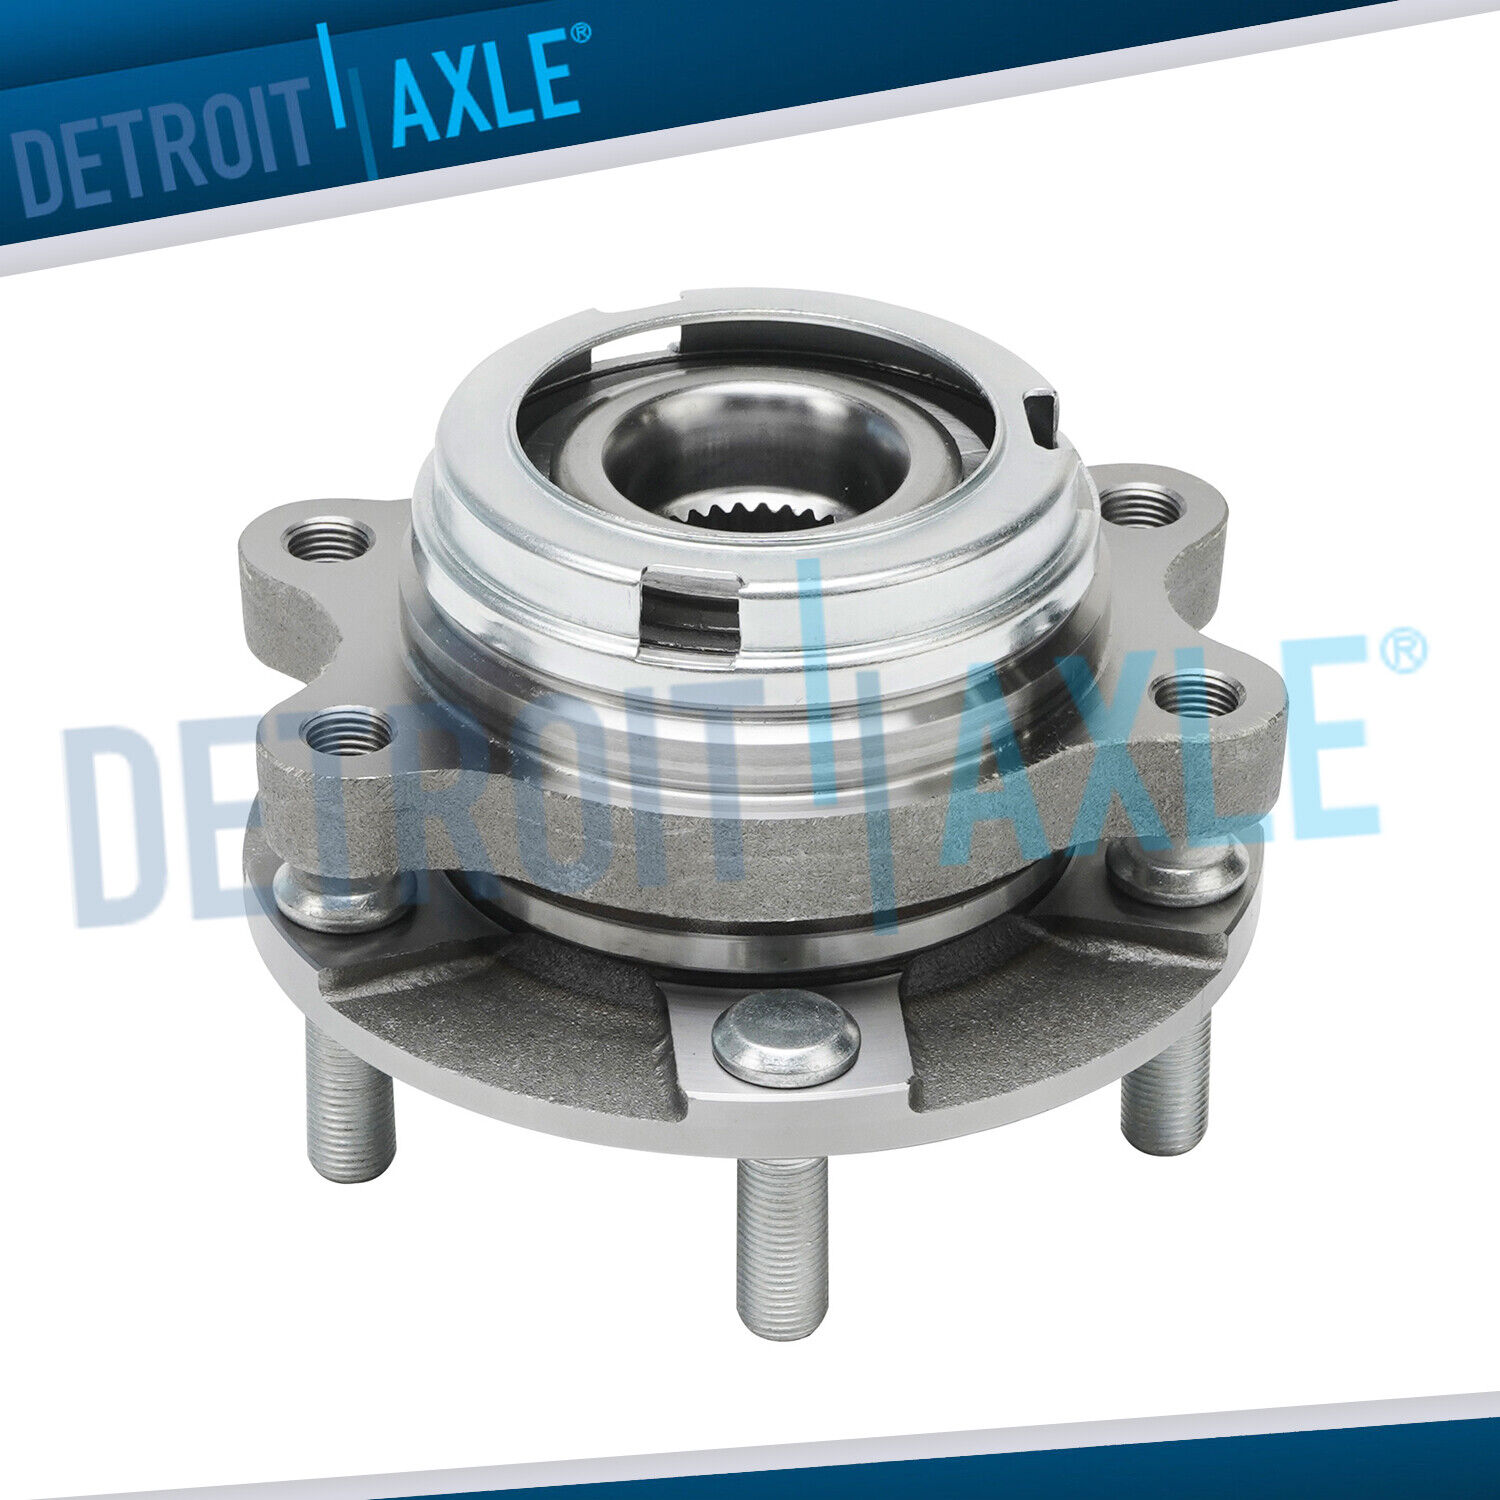 Front Wheel Bearing Hub for Nissan Quest Altima Maxima Murano Pathfinder JX35